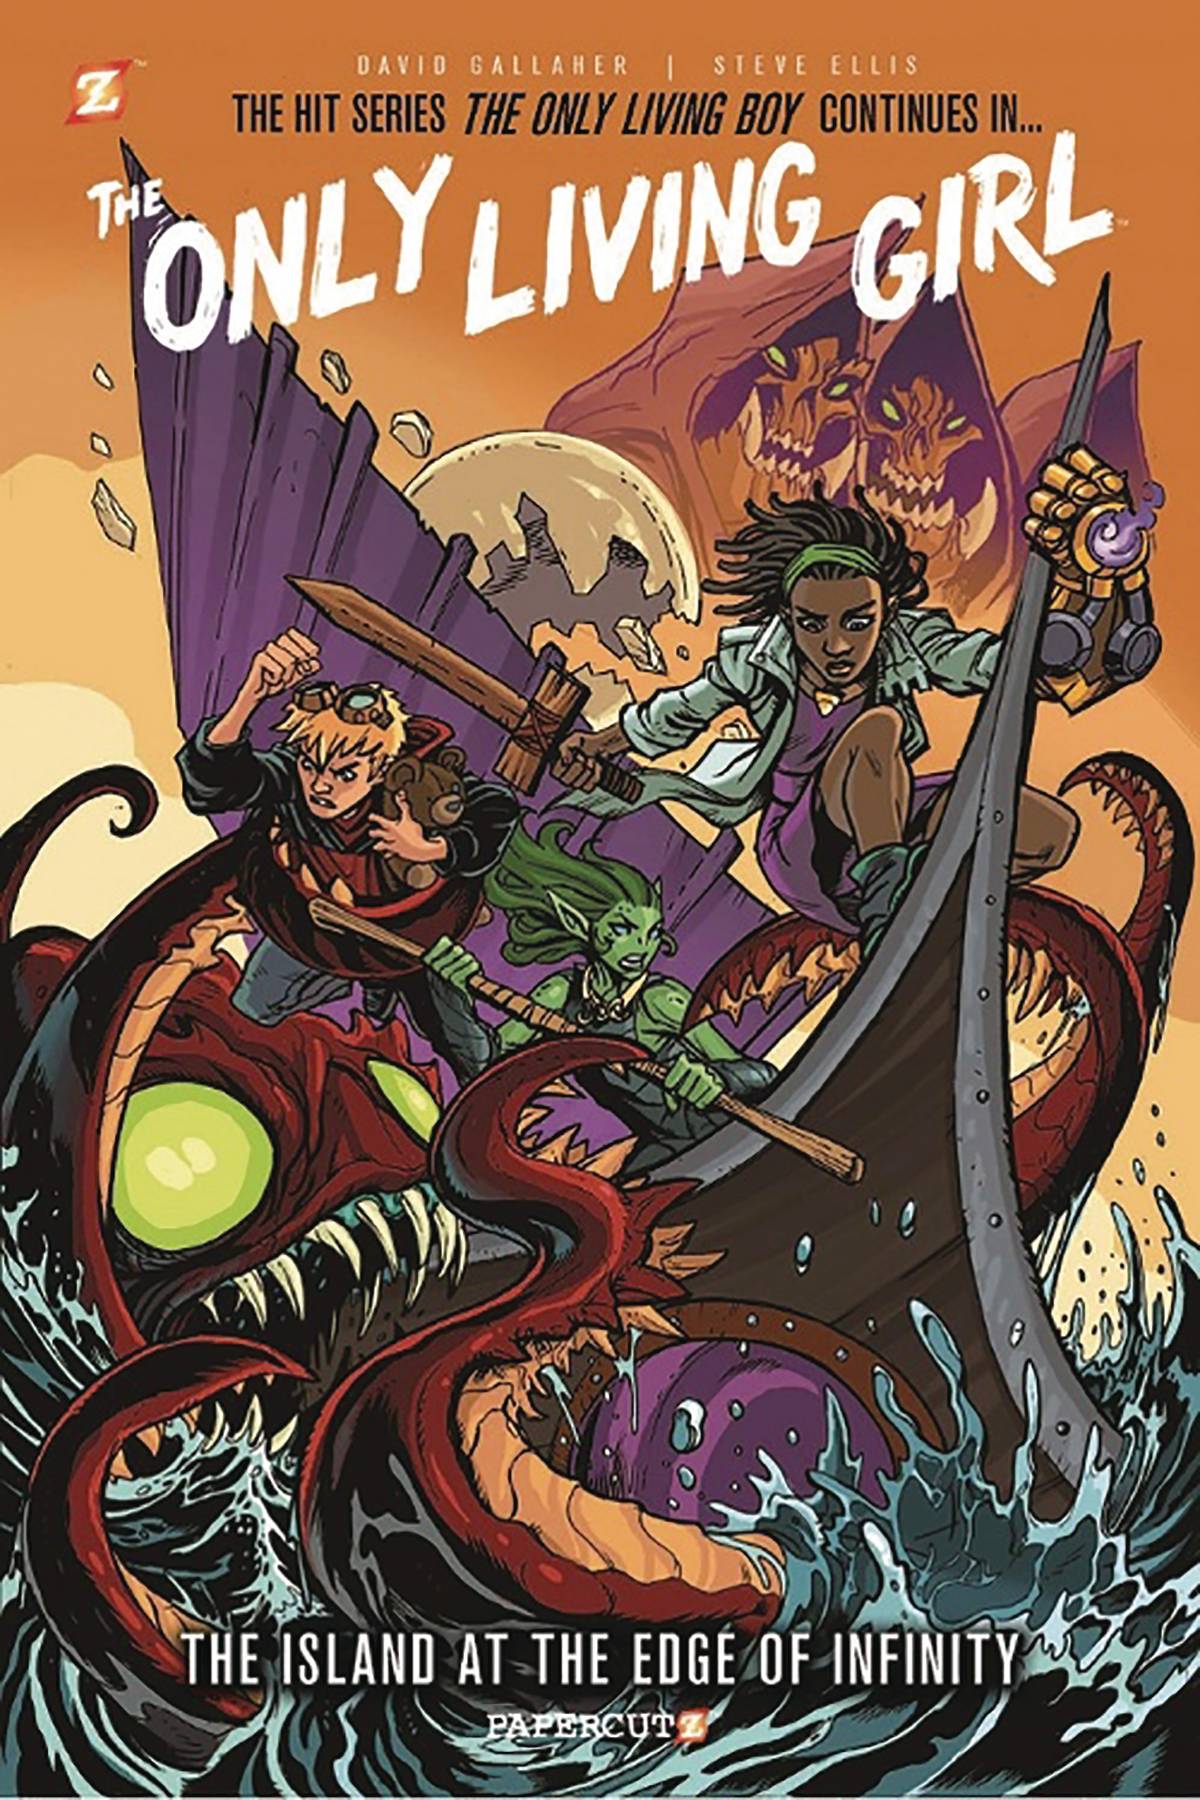 A Black girl with shoulderlength locs crouches on the prow of a small sailboat, wielding a glowing gauntlet in one hand and a wooden sword in the other. The boat is being attacked by a red sea monster, its tentacles wrapped around a blond boy with goggles who is clutching a teddy bear. A green-skinned young woman with pointy ears determinedly attempts to paddle the ship. Three hooded, tusked skull-like creatures watch from above.